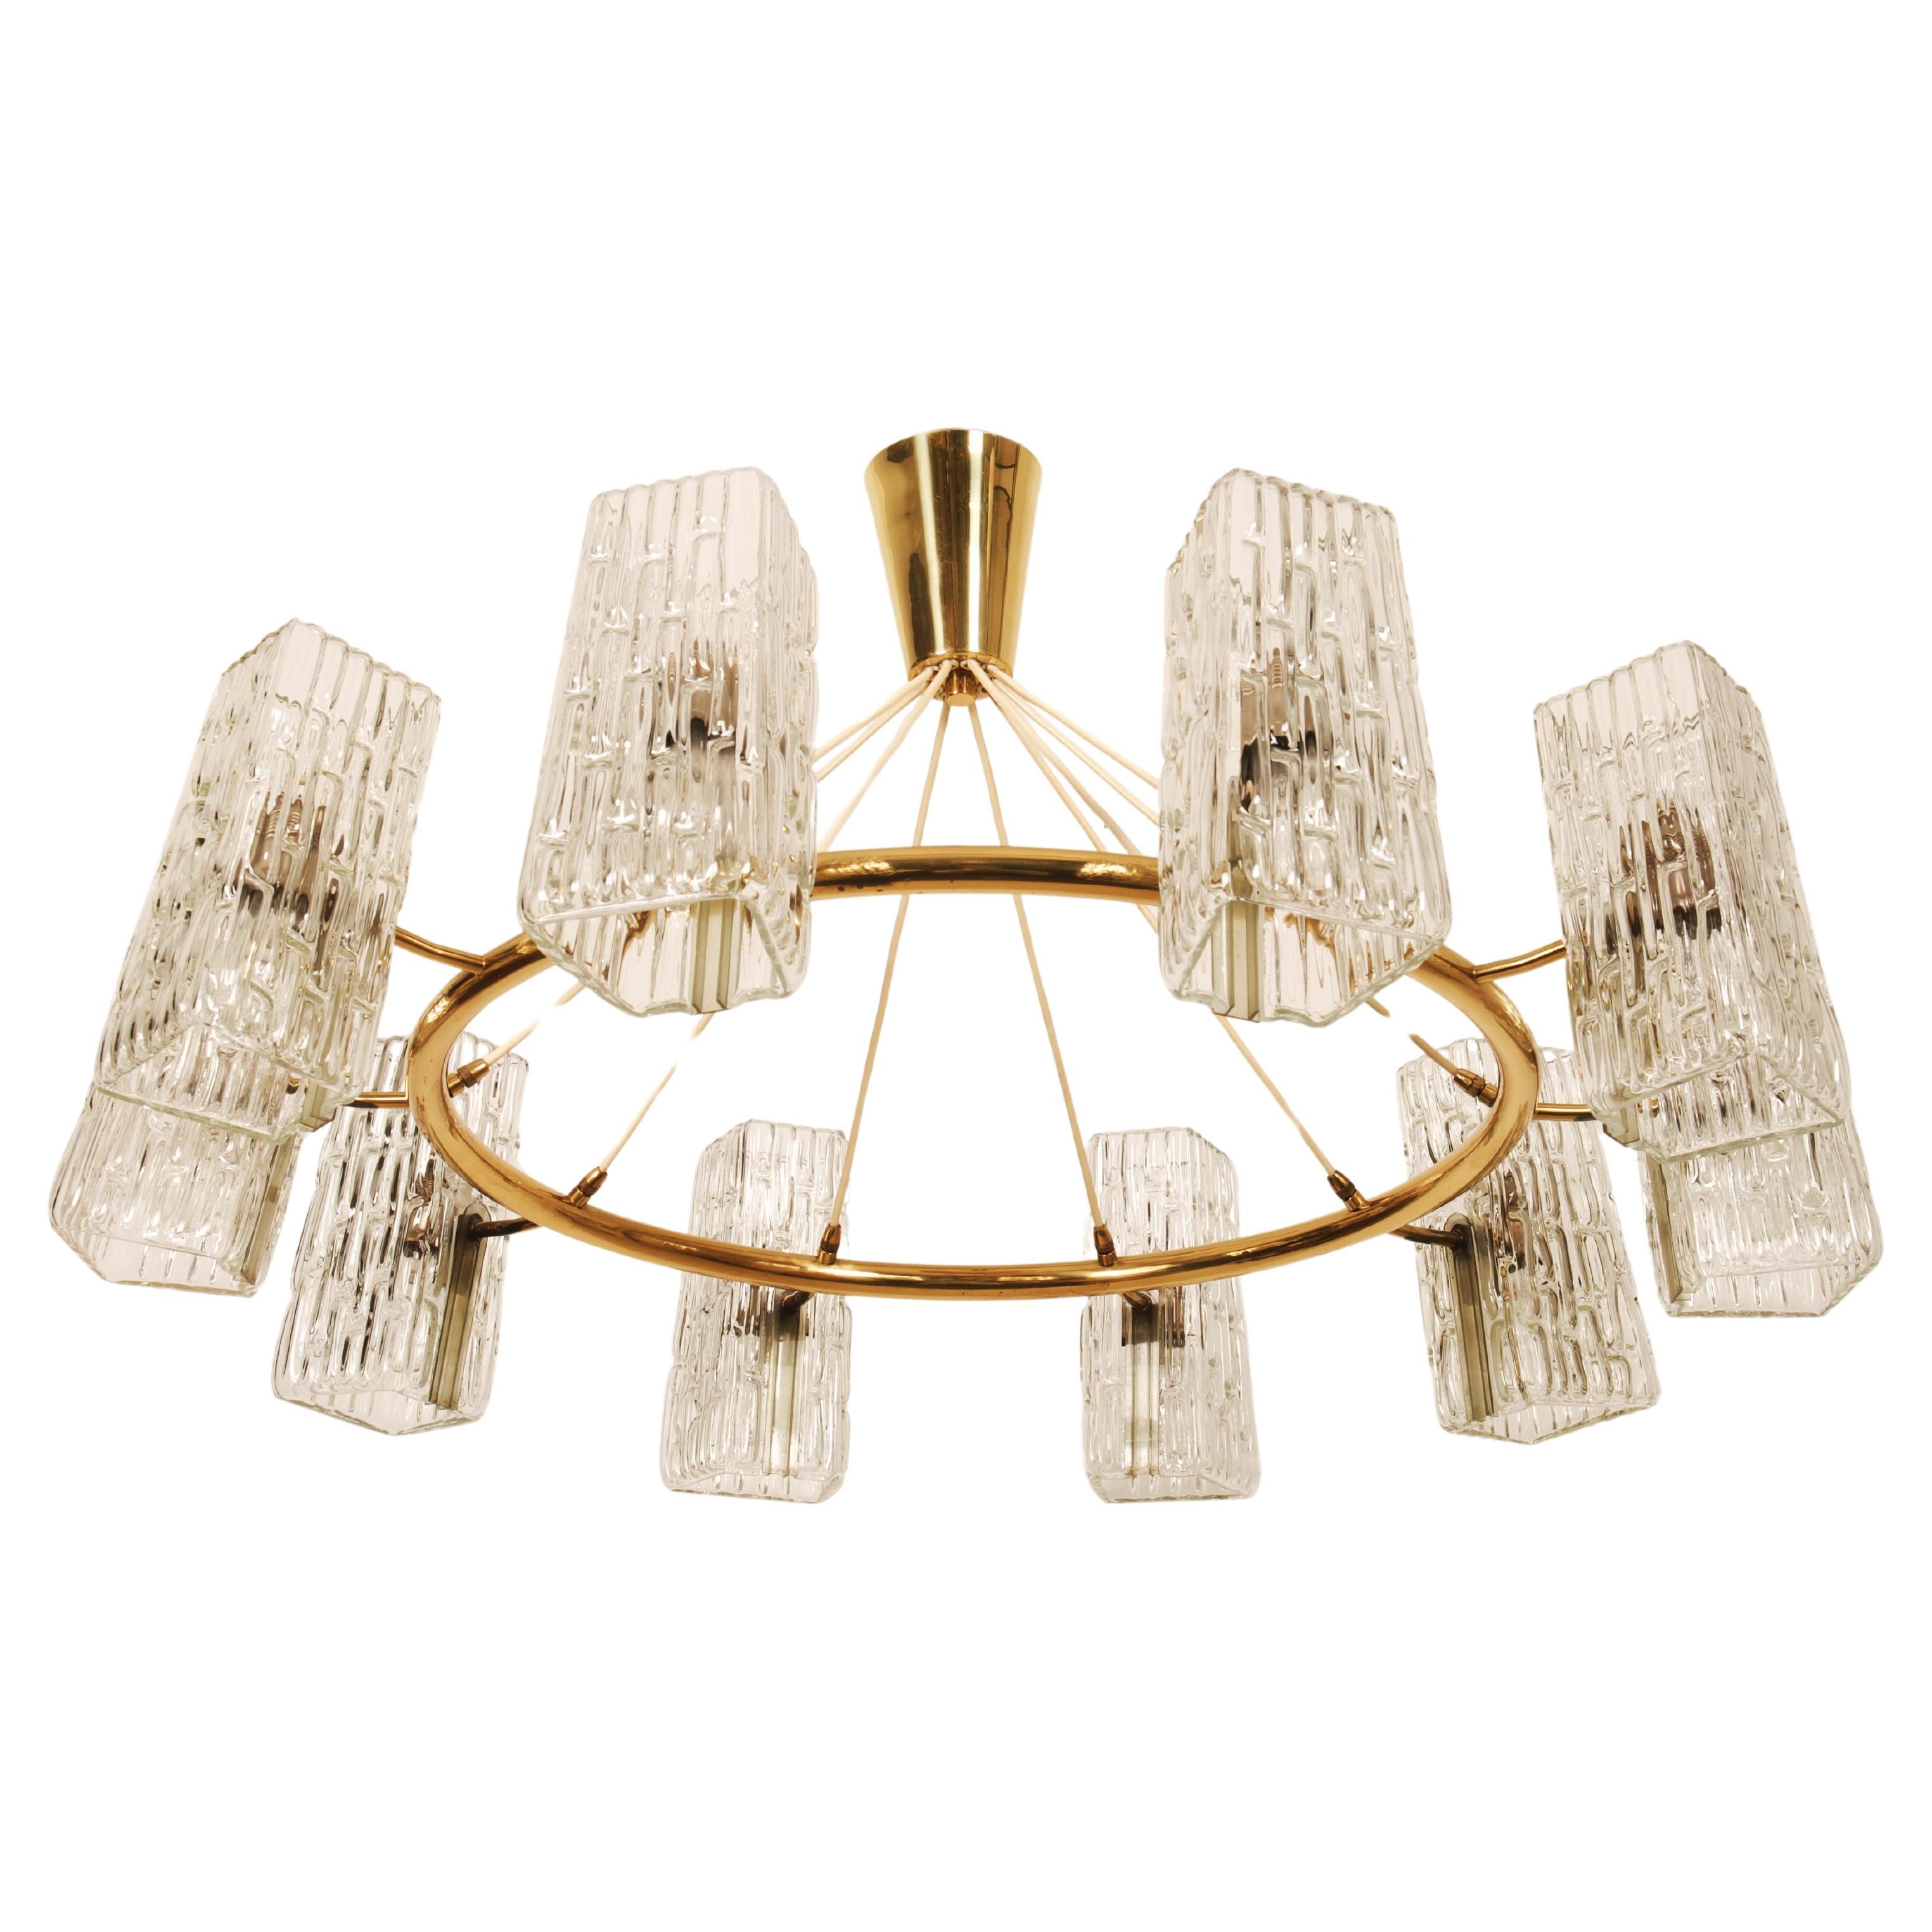 Huge Midcentury Brass Chandelier With Pressed Glass Shades By Rupert Nikoll For Sale